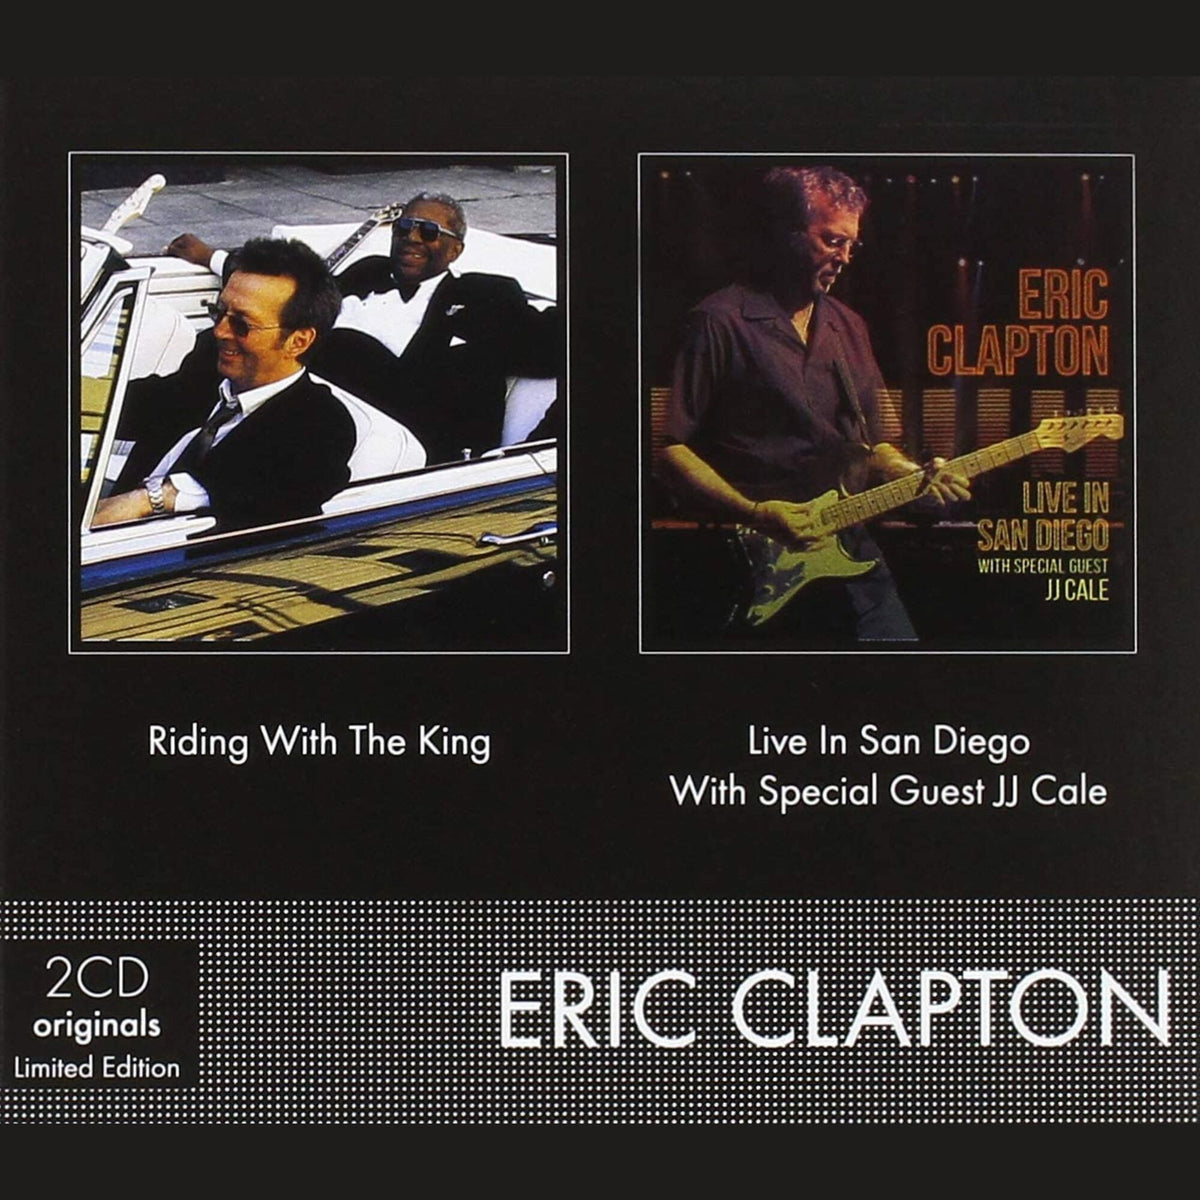 Eric Clapton - Riding With the King / Live in San Diego